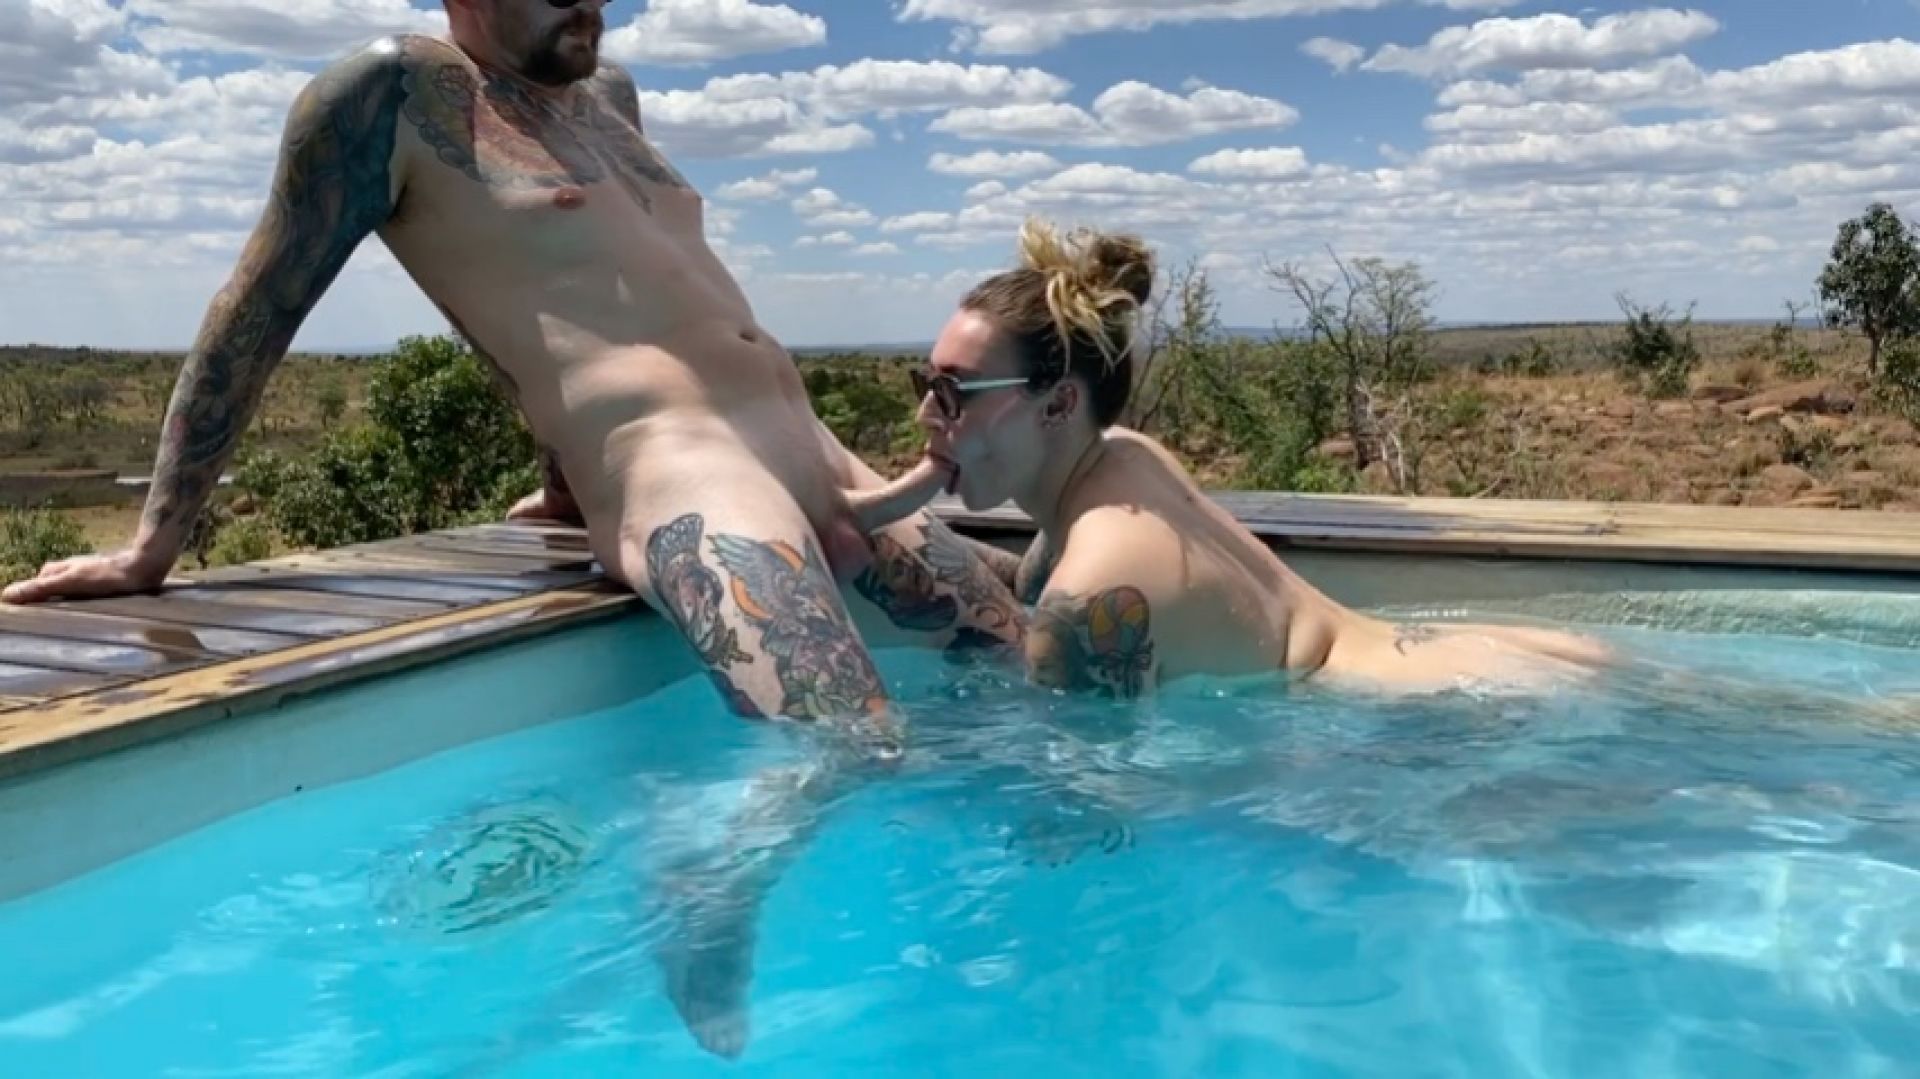 OUTDOOR Blowjob by the Pool